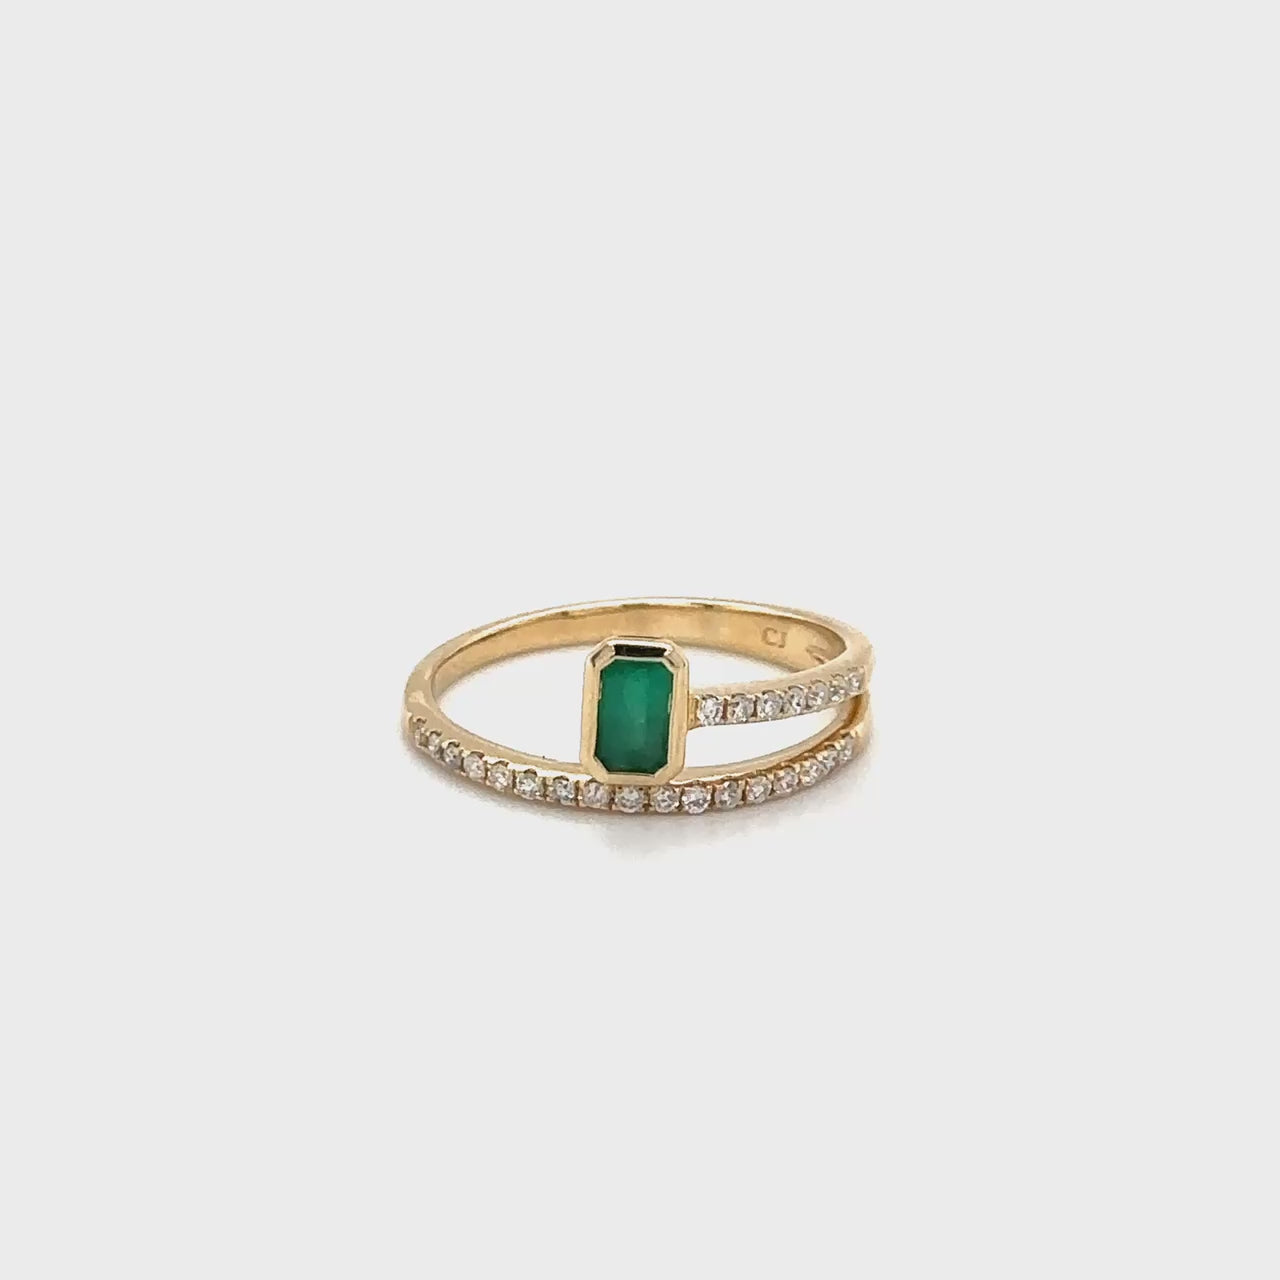 A luxurious emerald and diamond ring, featuring a vivid green emerald stone, surrounded by sparkling diamonds, set in lustrous white gold.